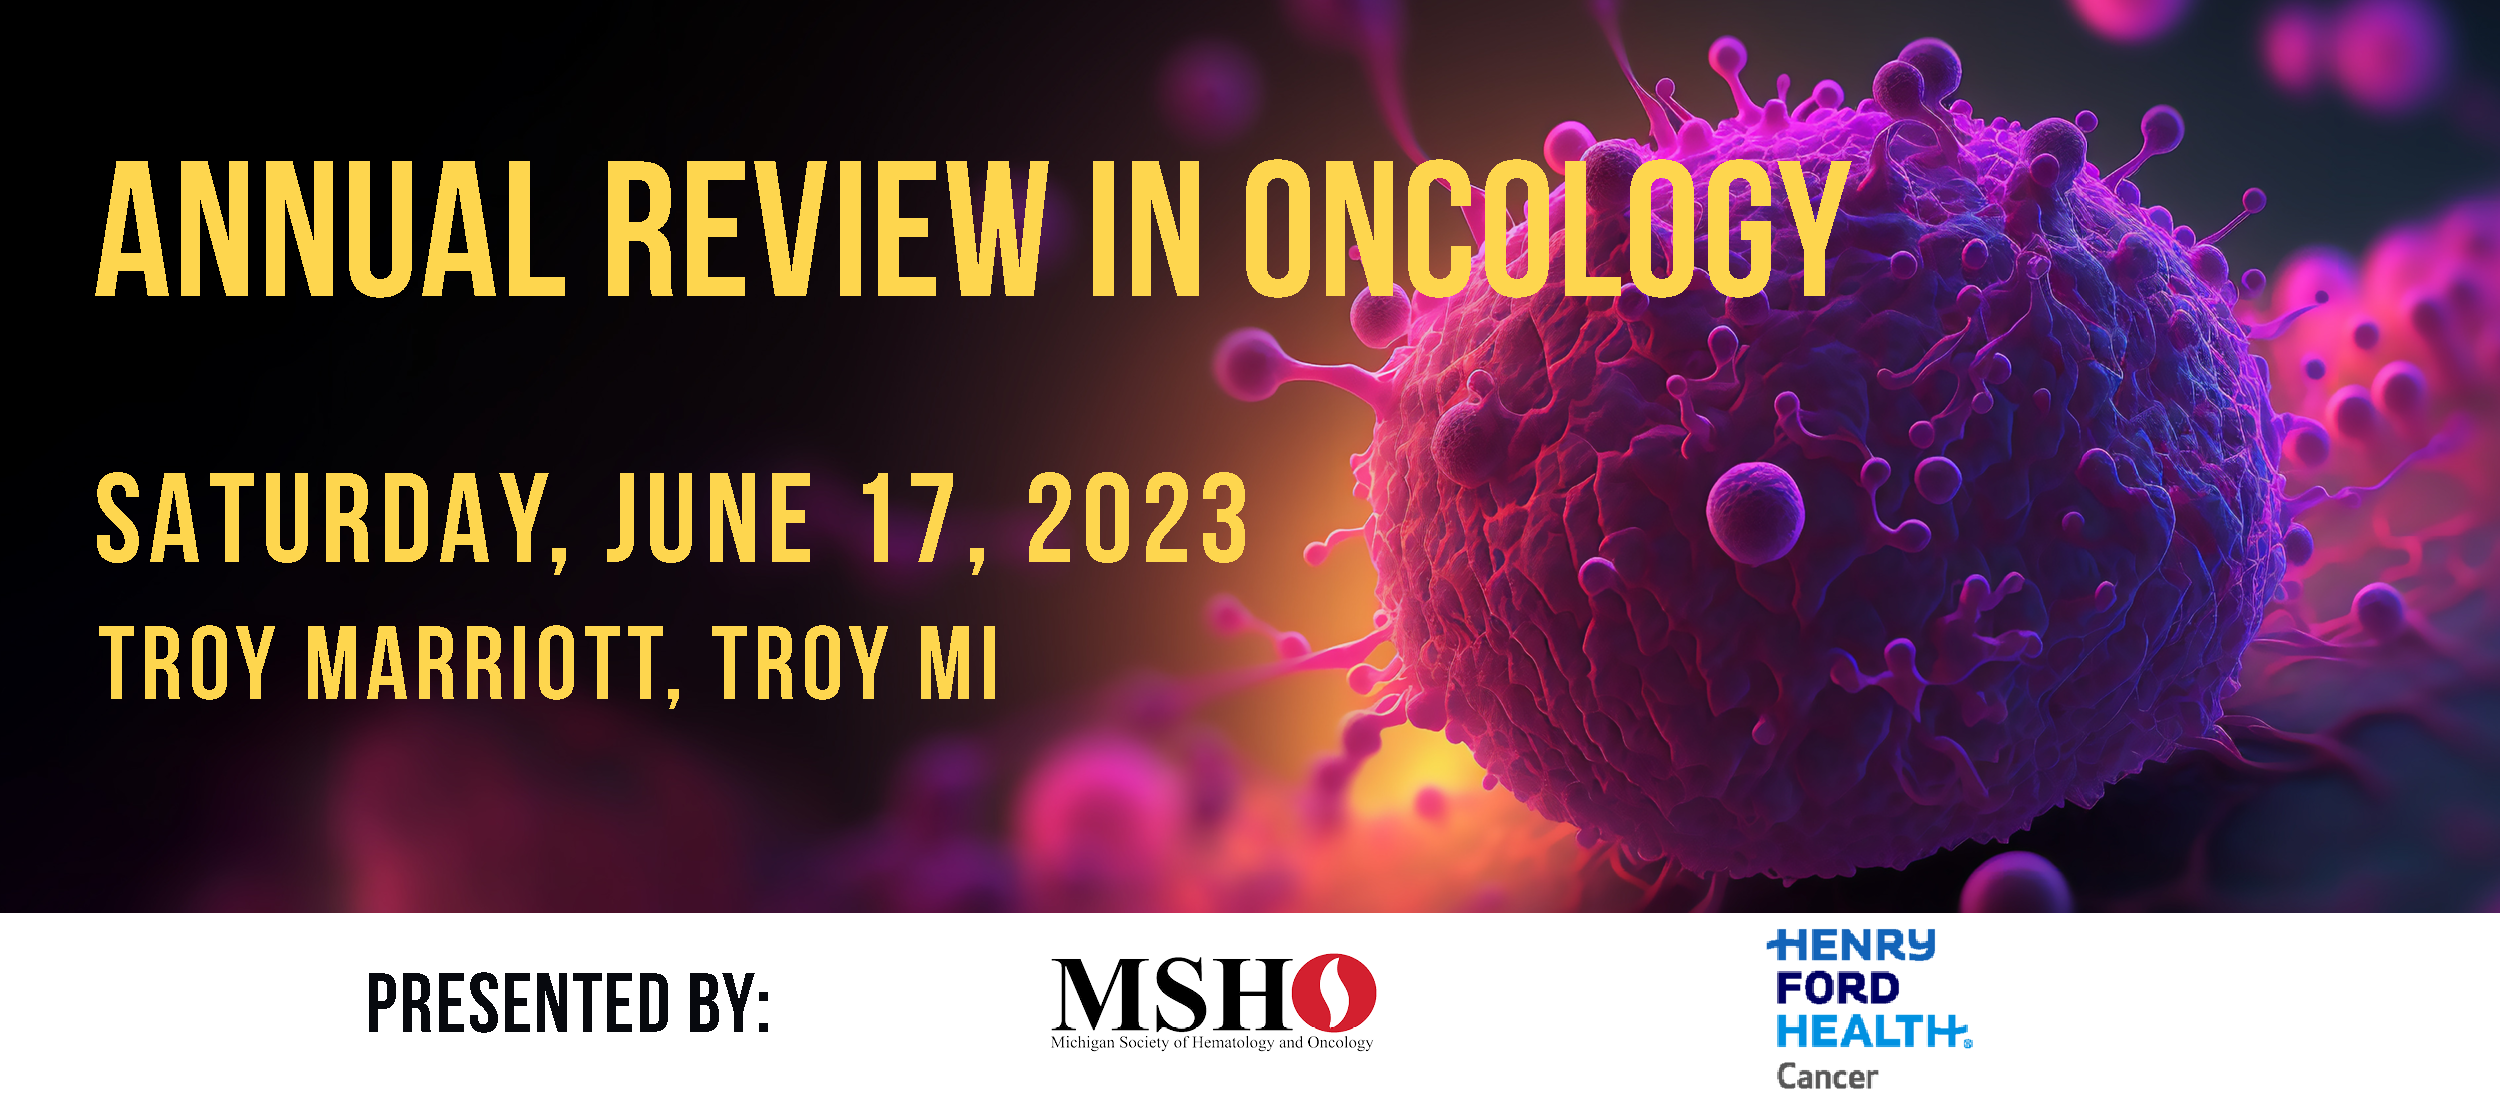 Annual Review in Oncology